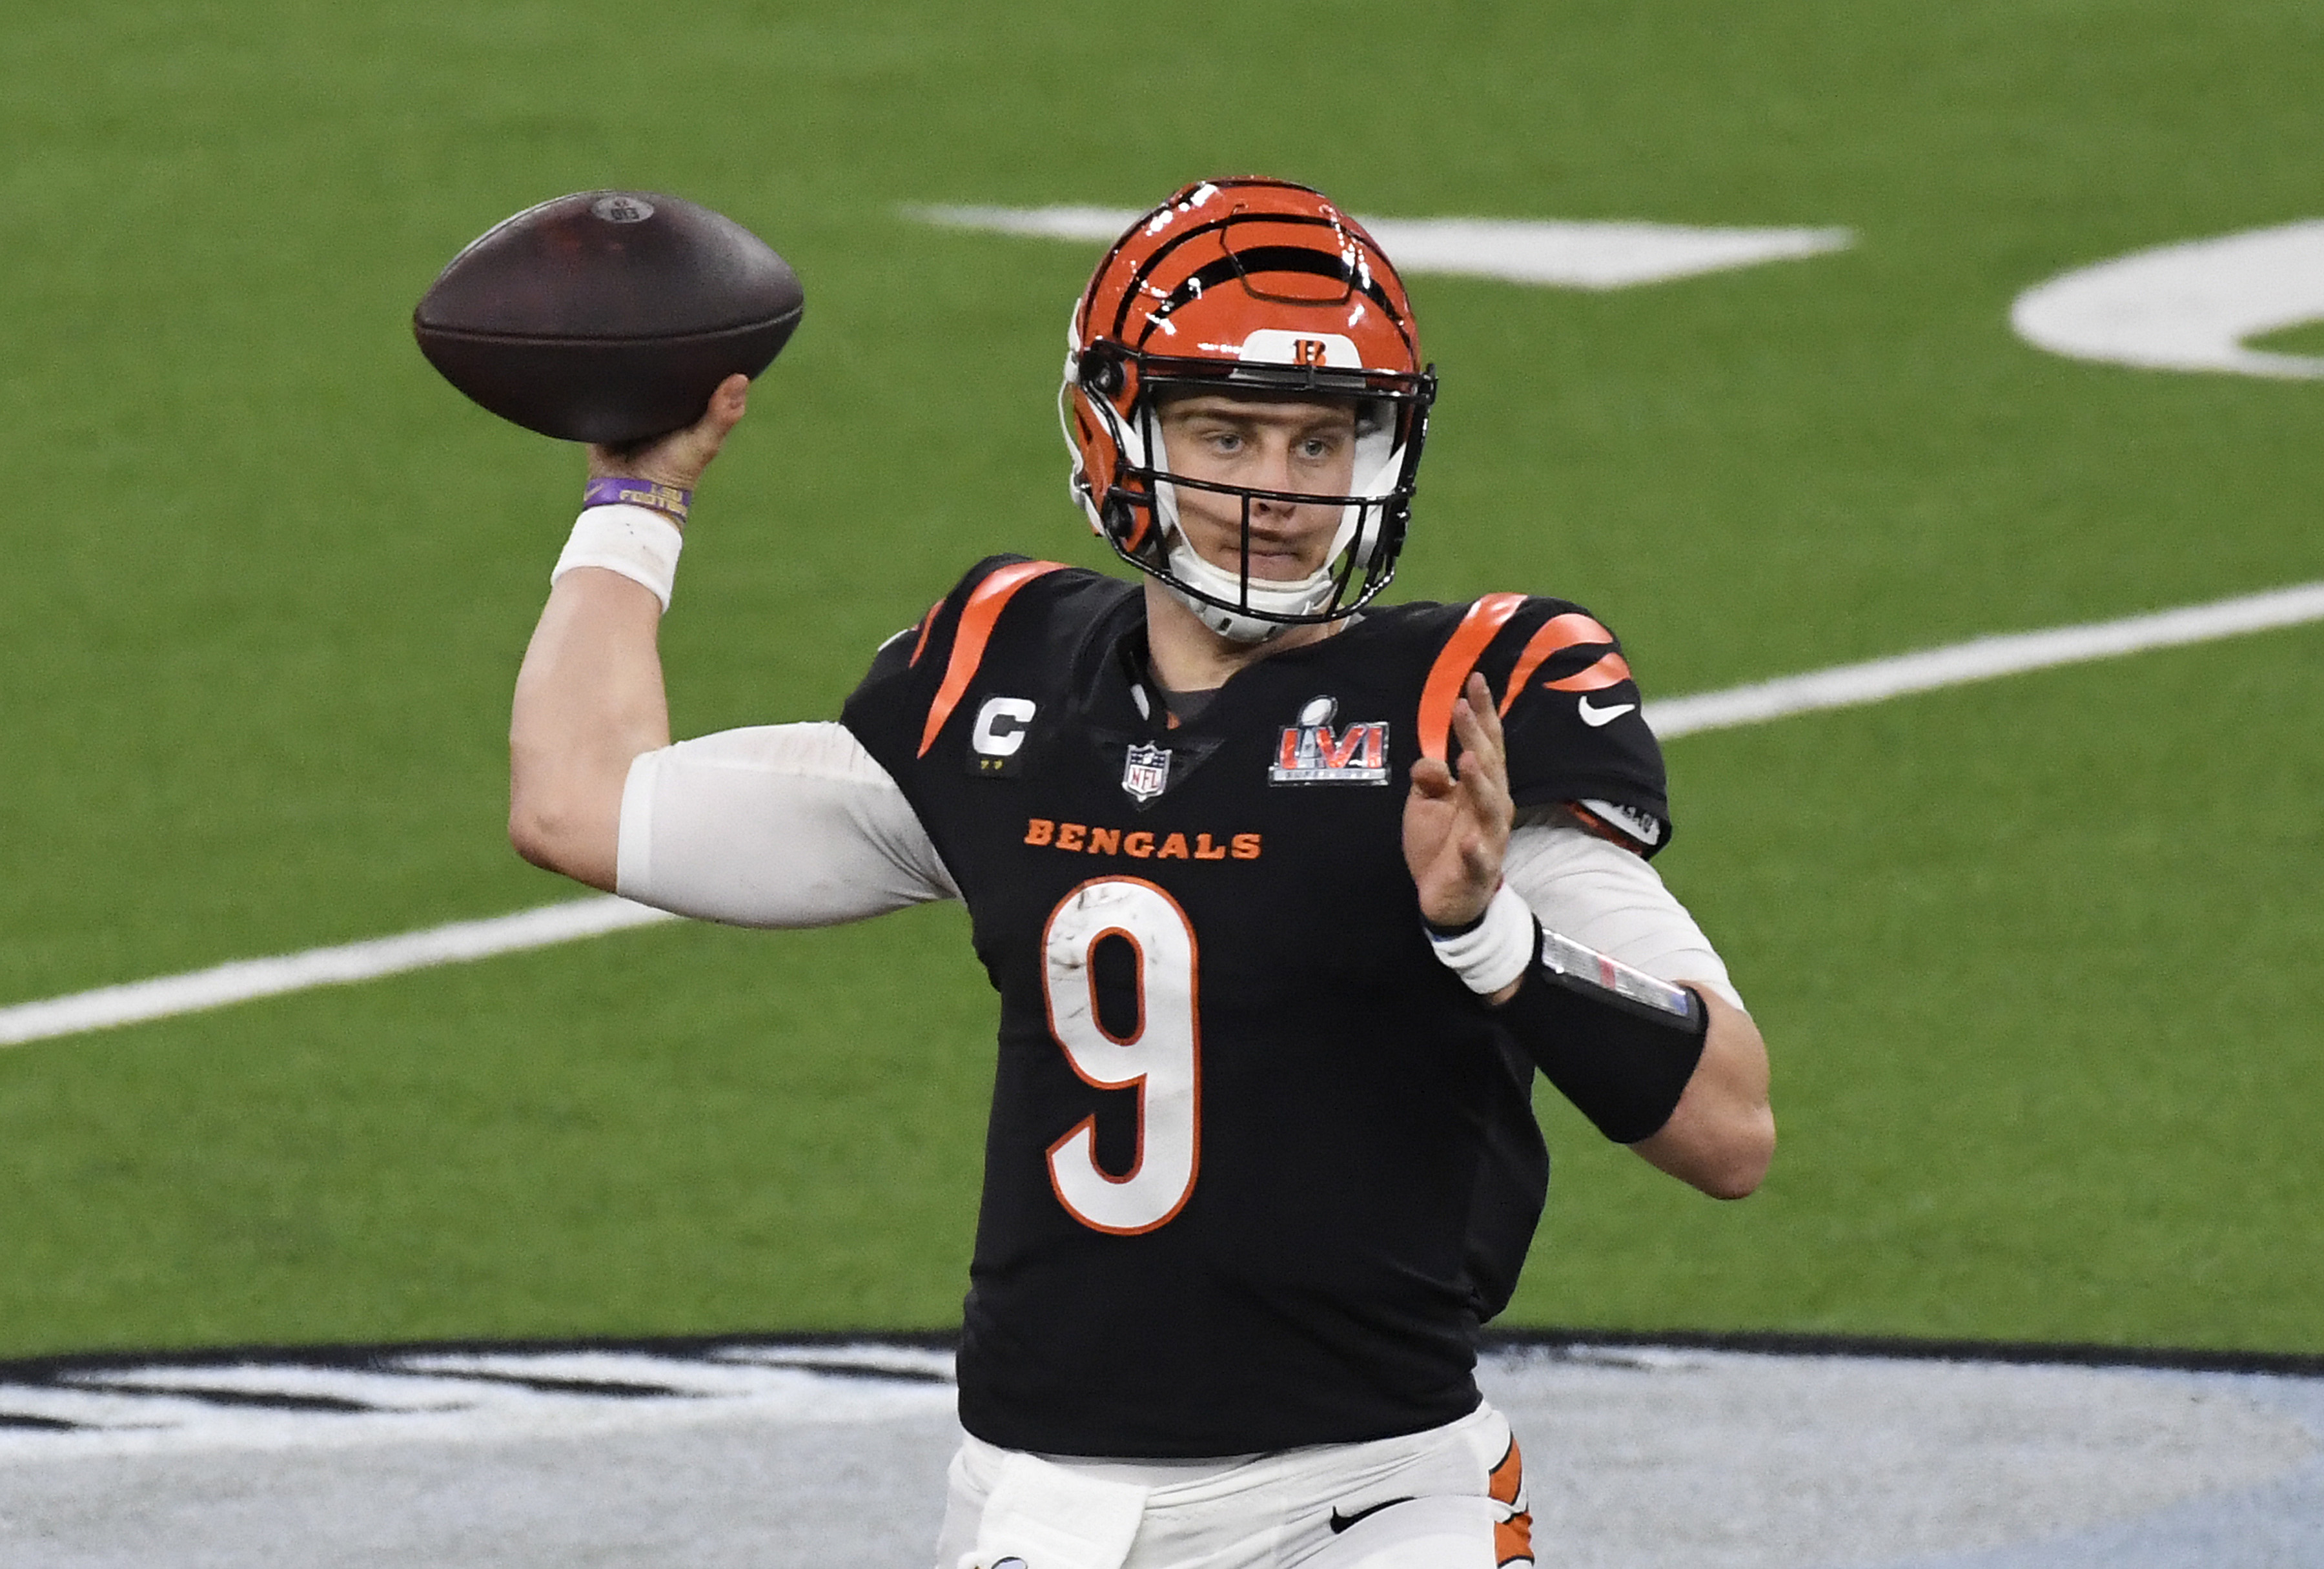 Cincinnati's Joe Burrow plays first game since becoming NFL's highest paid  player. Cleveland Browns play Bengals in Ohio Sunday